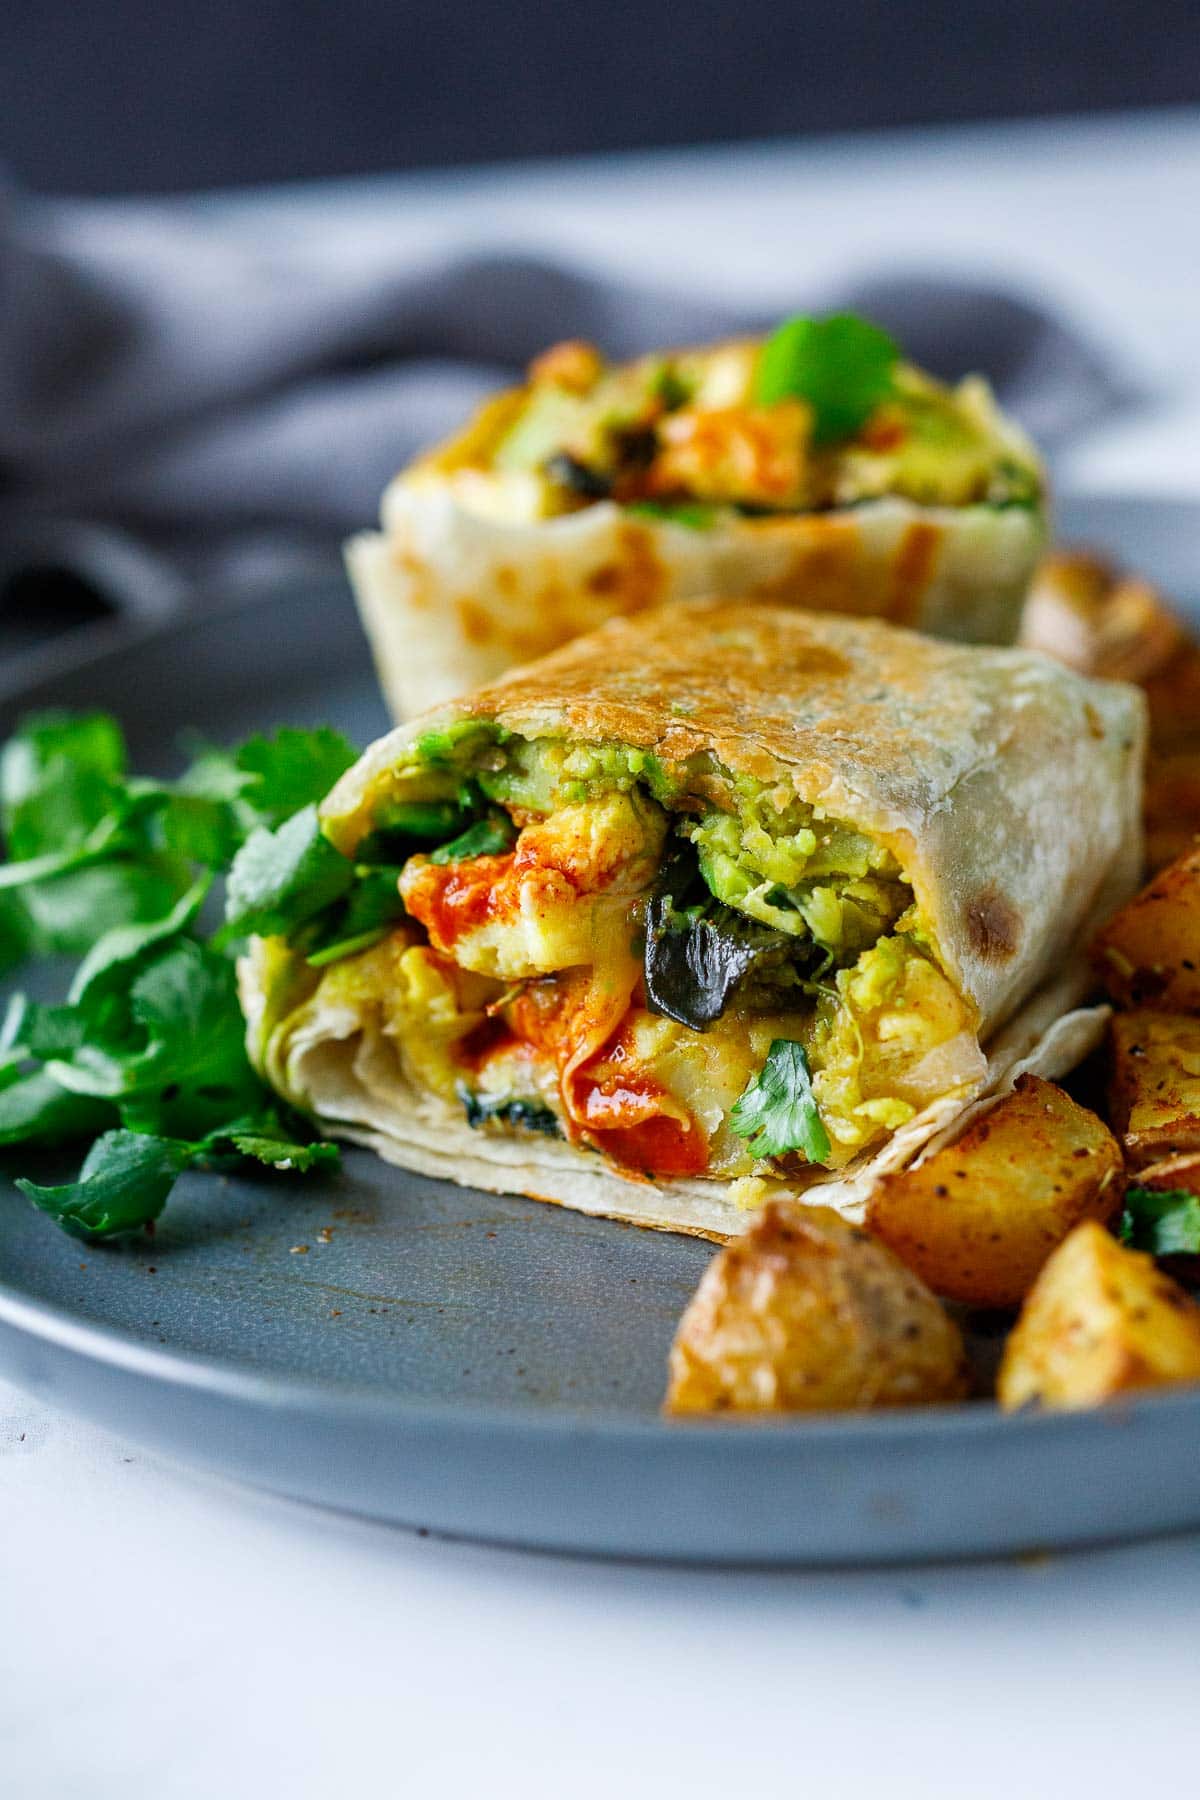 vegetarian breakfast burritos cut in half to reveal avocado, eggs, poblano, cilantro, and hot sauce- served on plate with potatoes.